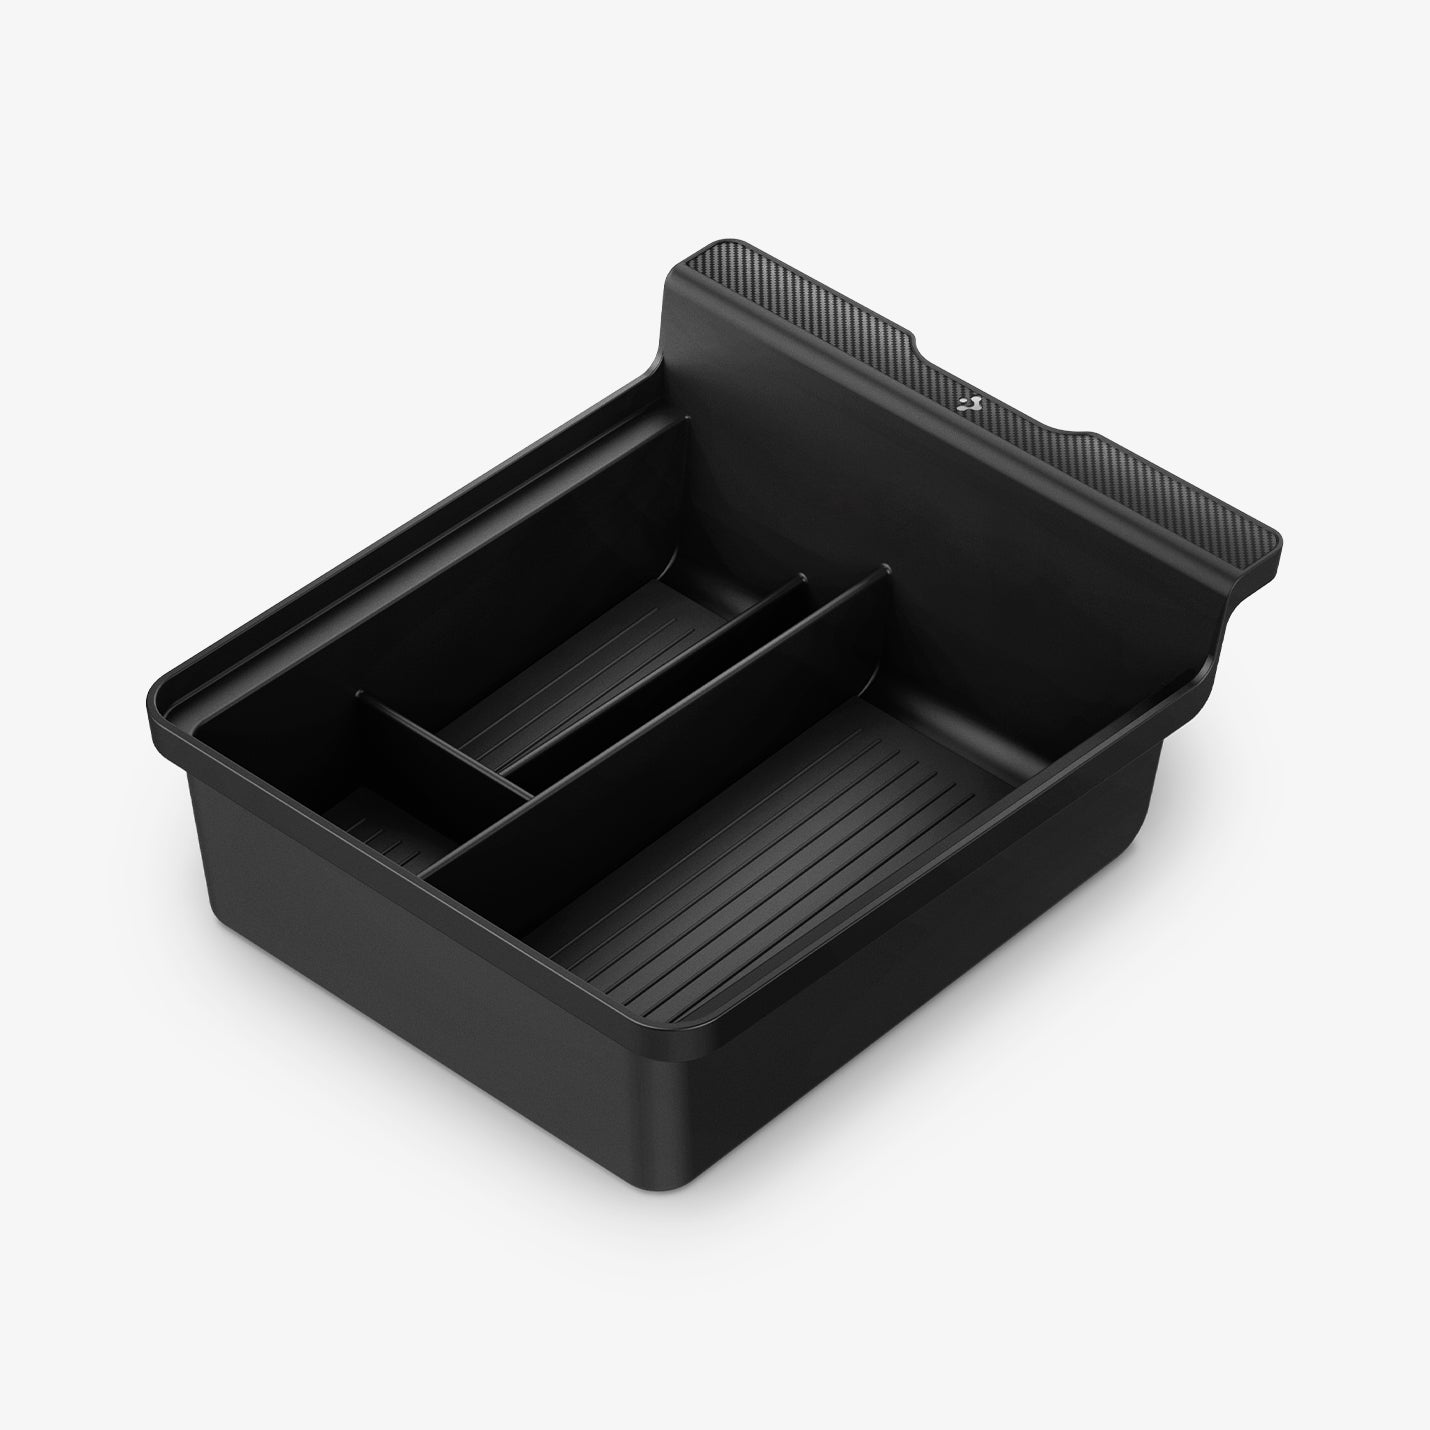 ACP04508 - Tesla Model y & 3 Center Console Organizer Tray in black showing the front, side and inside